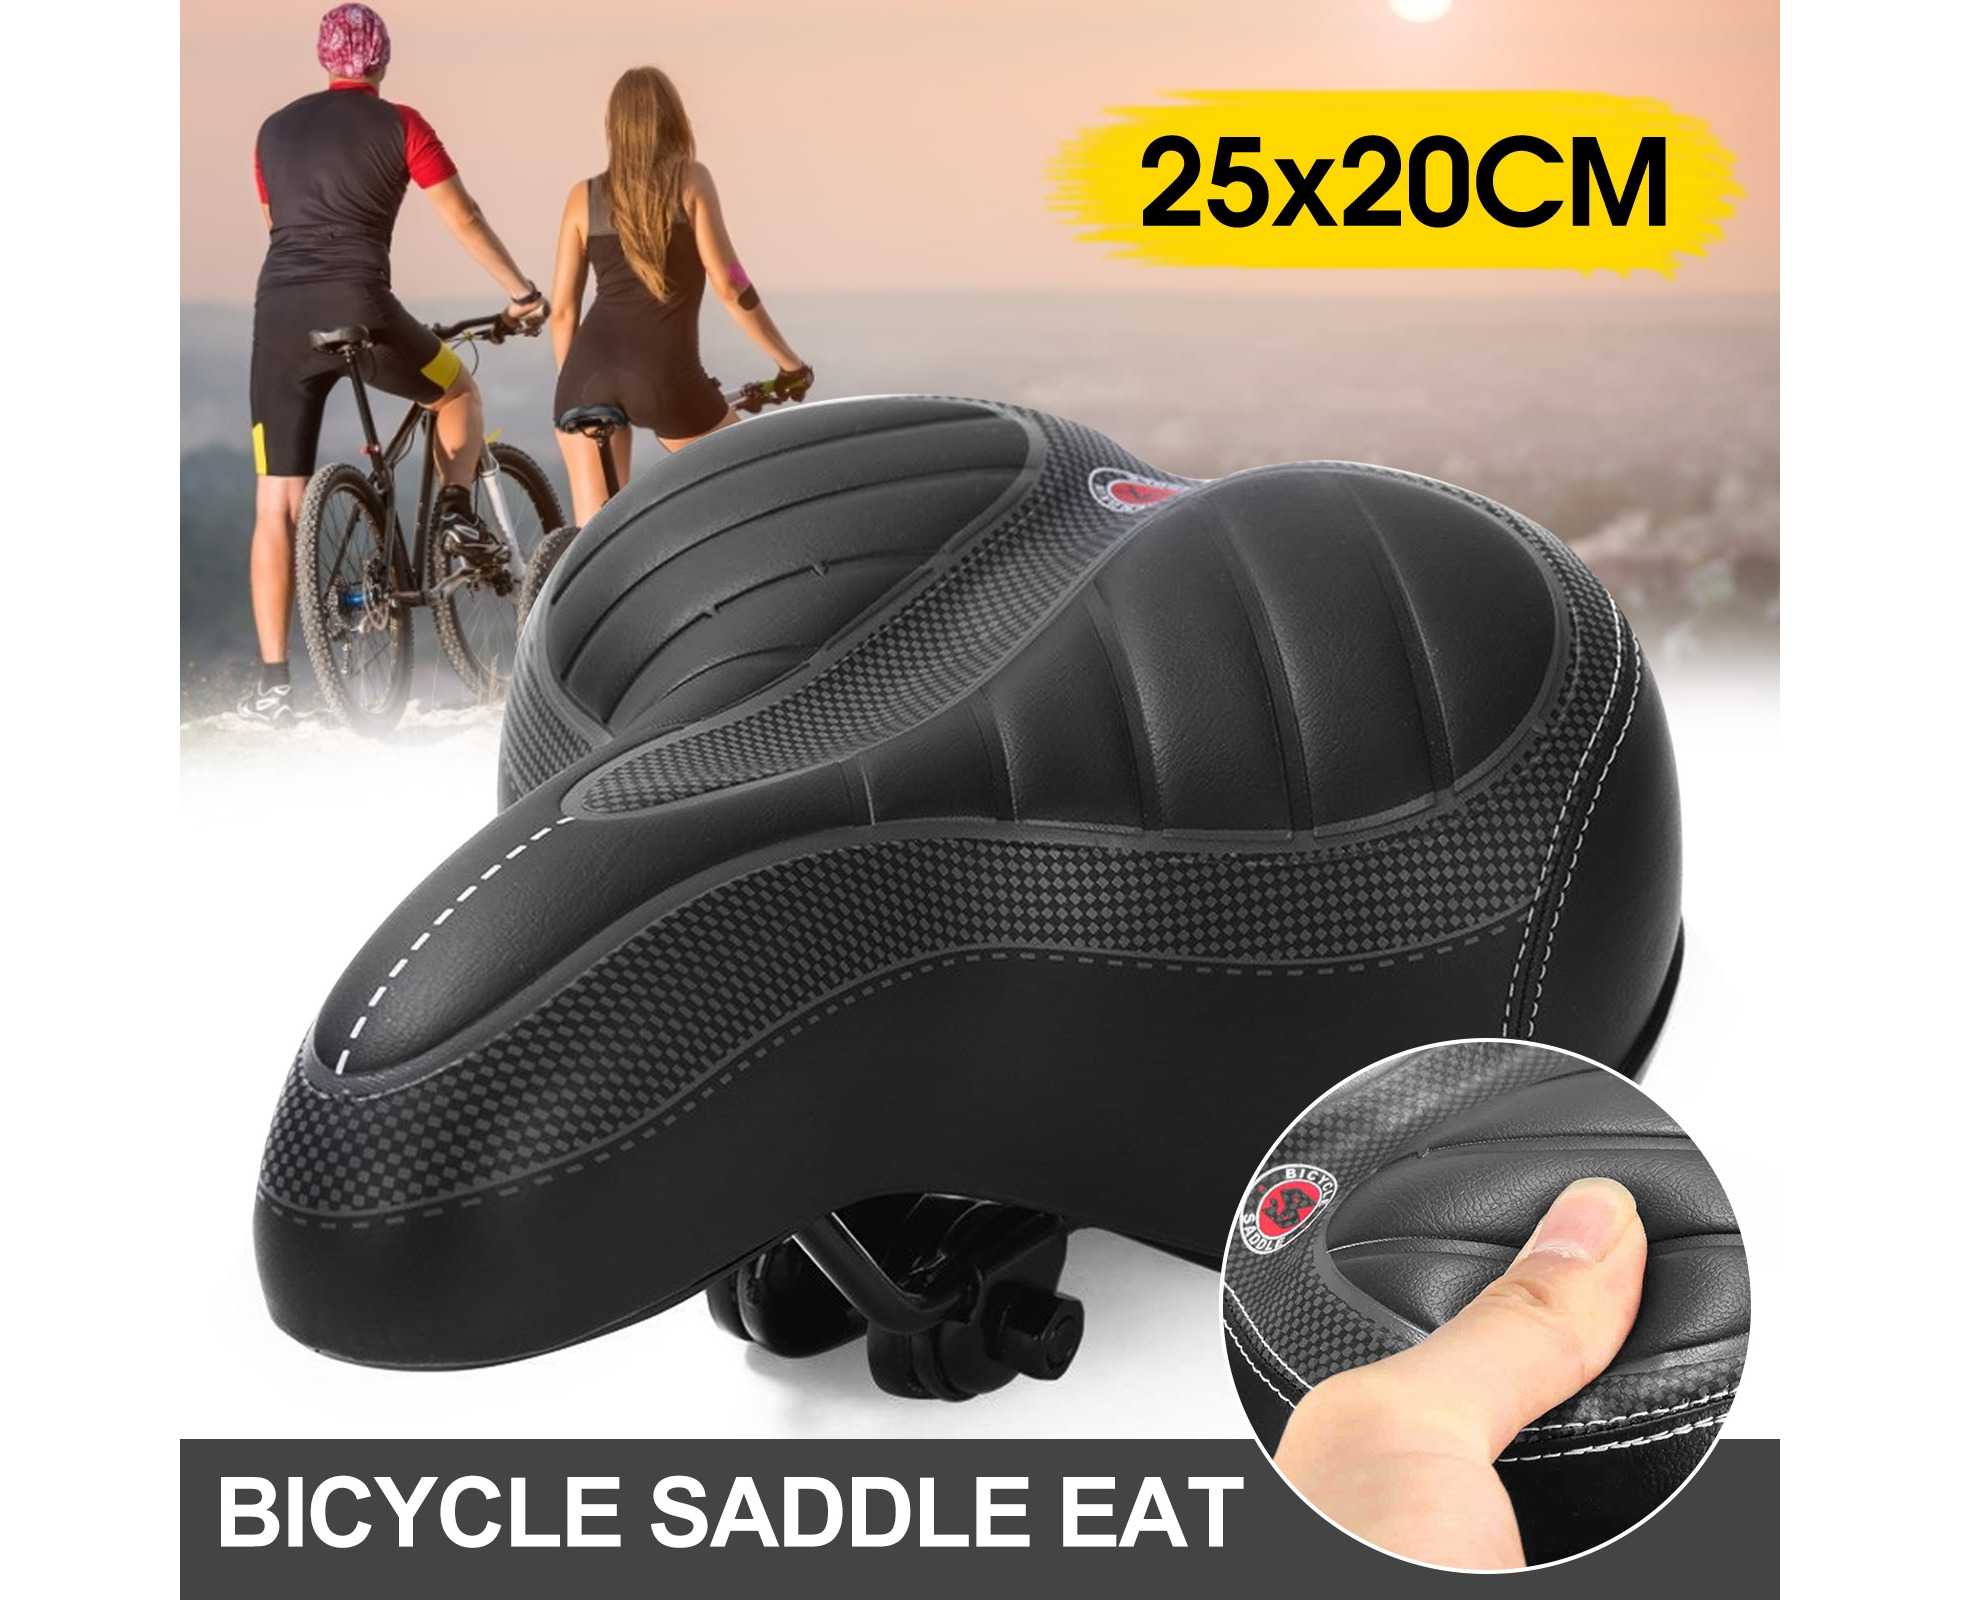 City Riding Bike Saddle Cover Comfortable Soft Padded Seat With Adjustable String For Cycling 